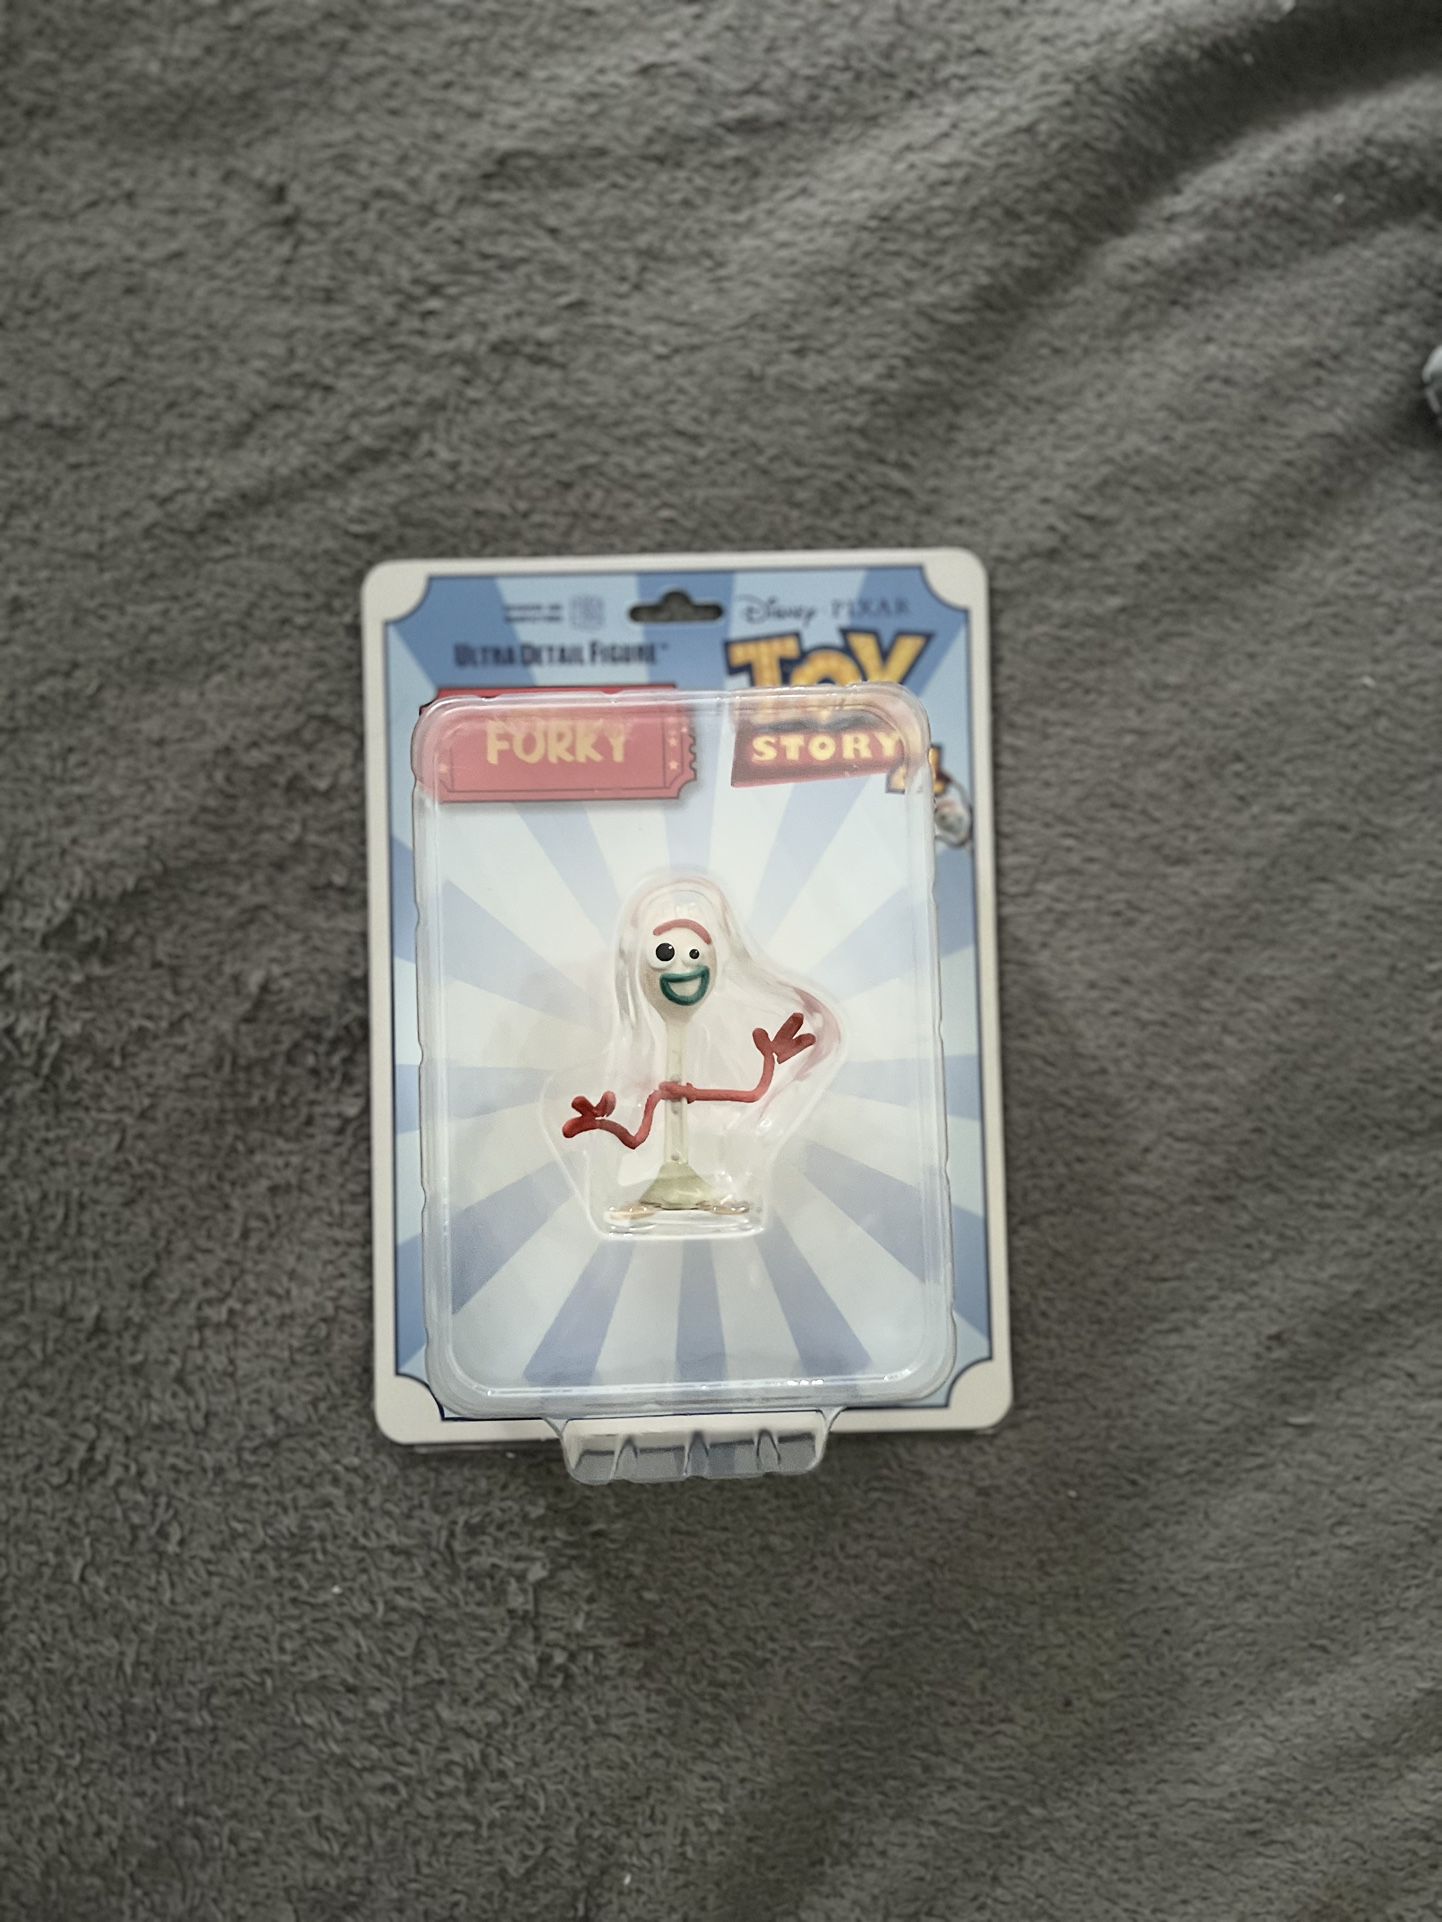 Medicom Toy Story “Forky” Collectible 